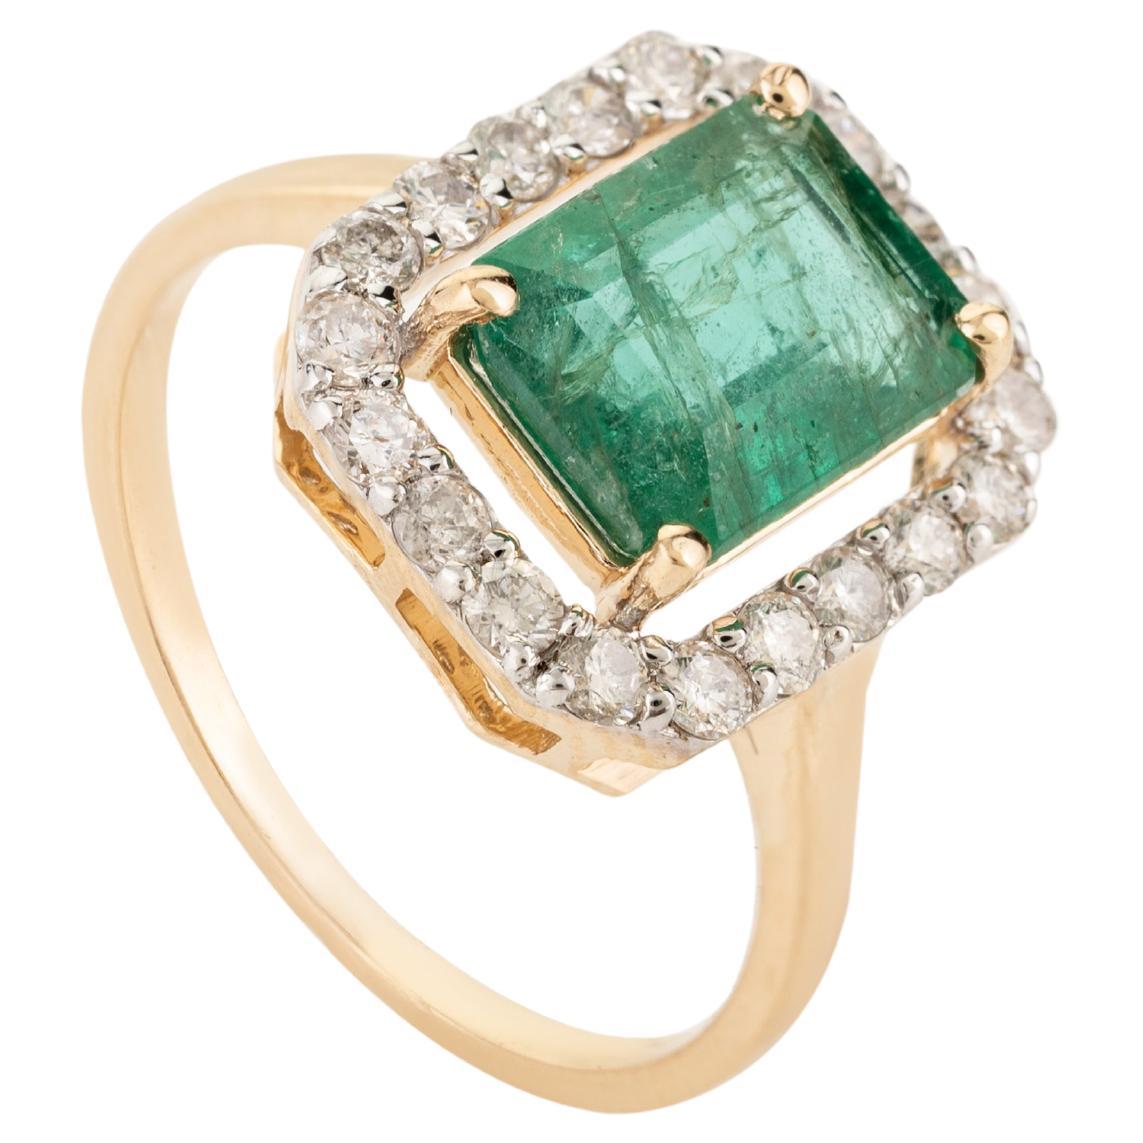 For Sale:  Rare Green Emerald Diamond Halo Engagement Ring in 18k Solid Yellow Gold